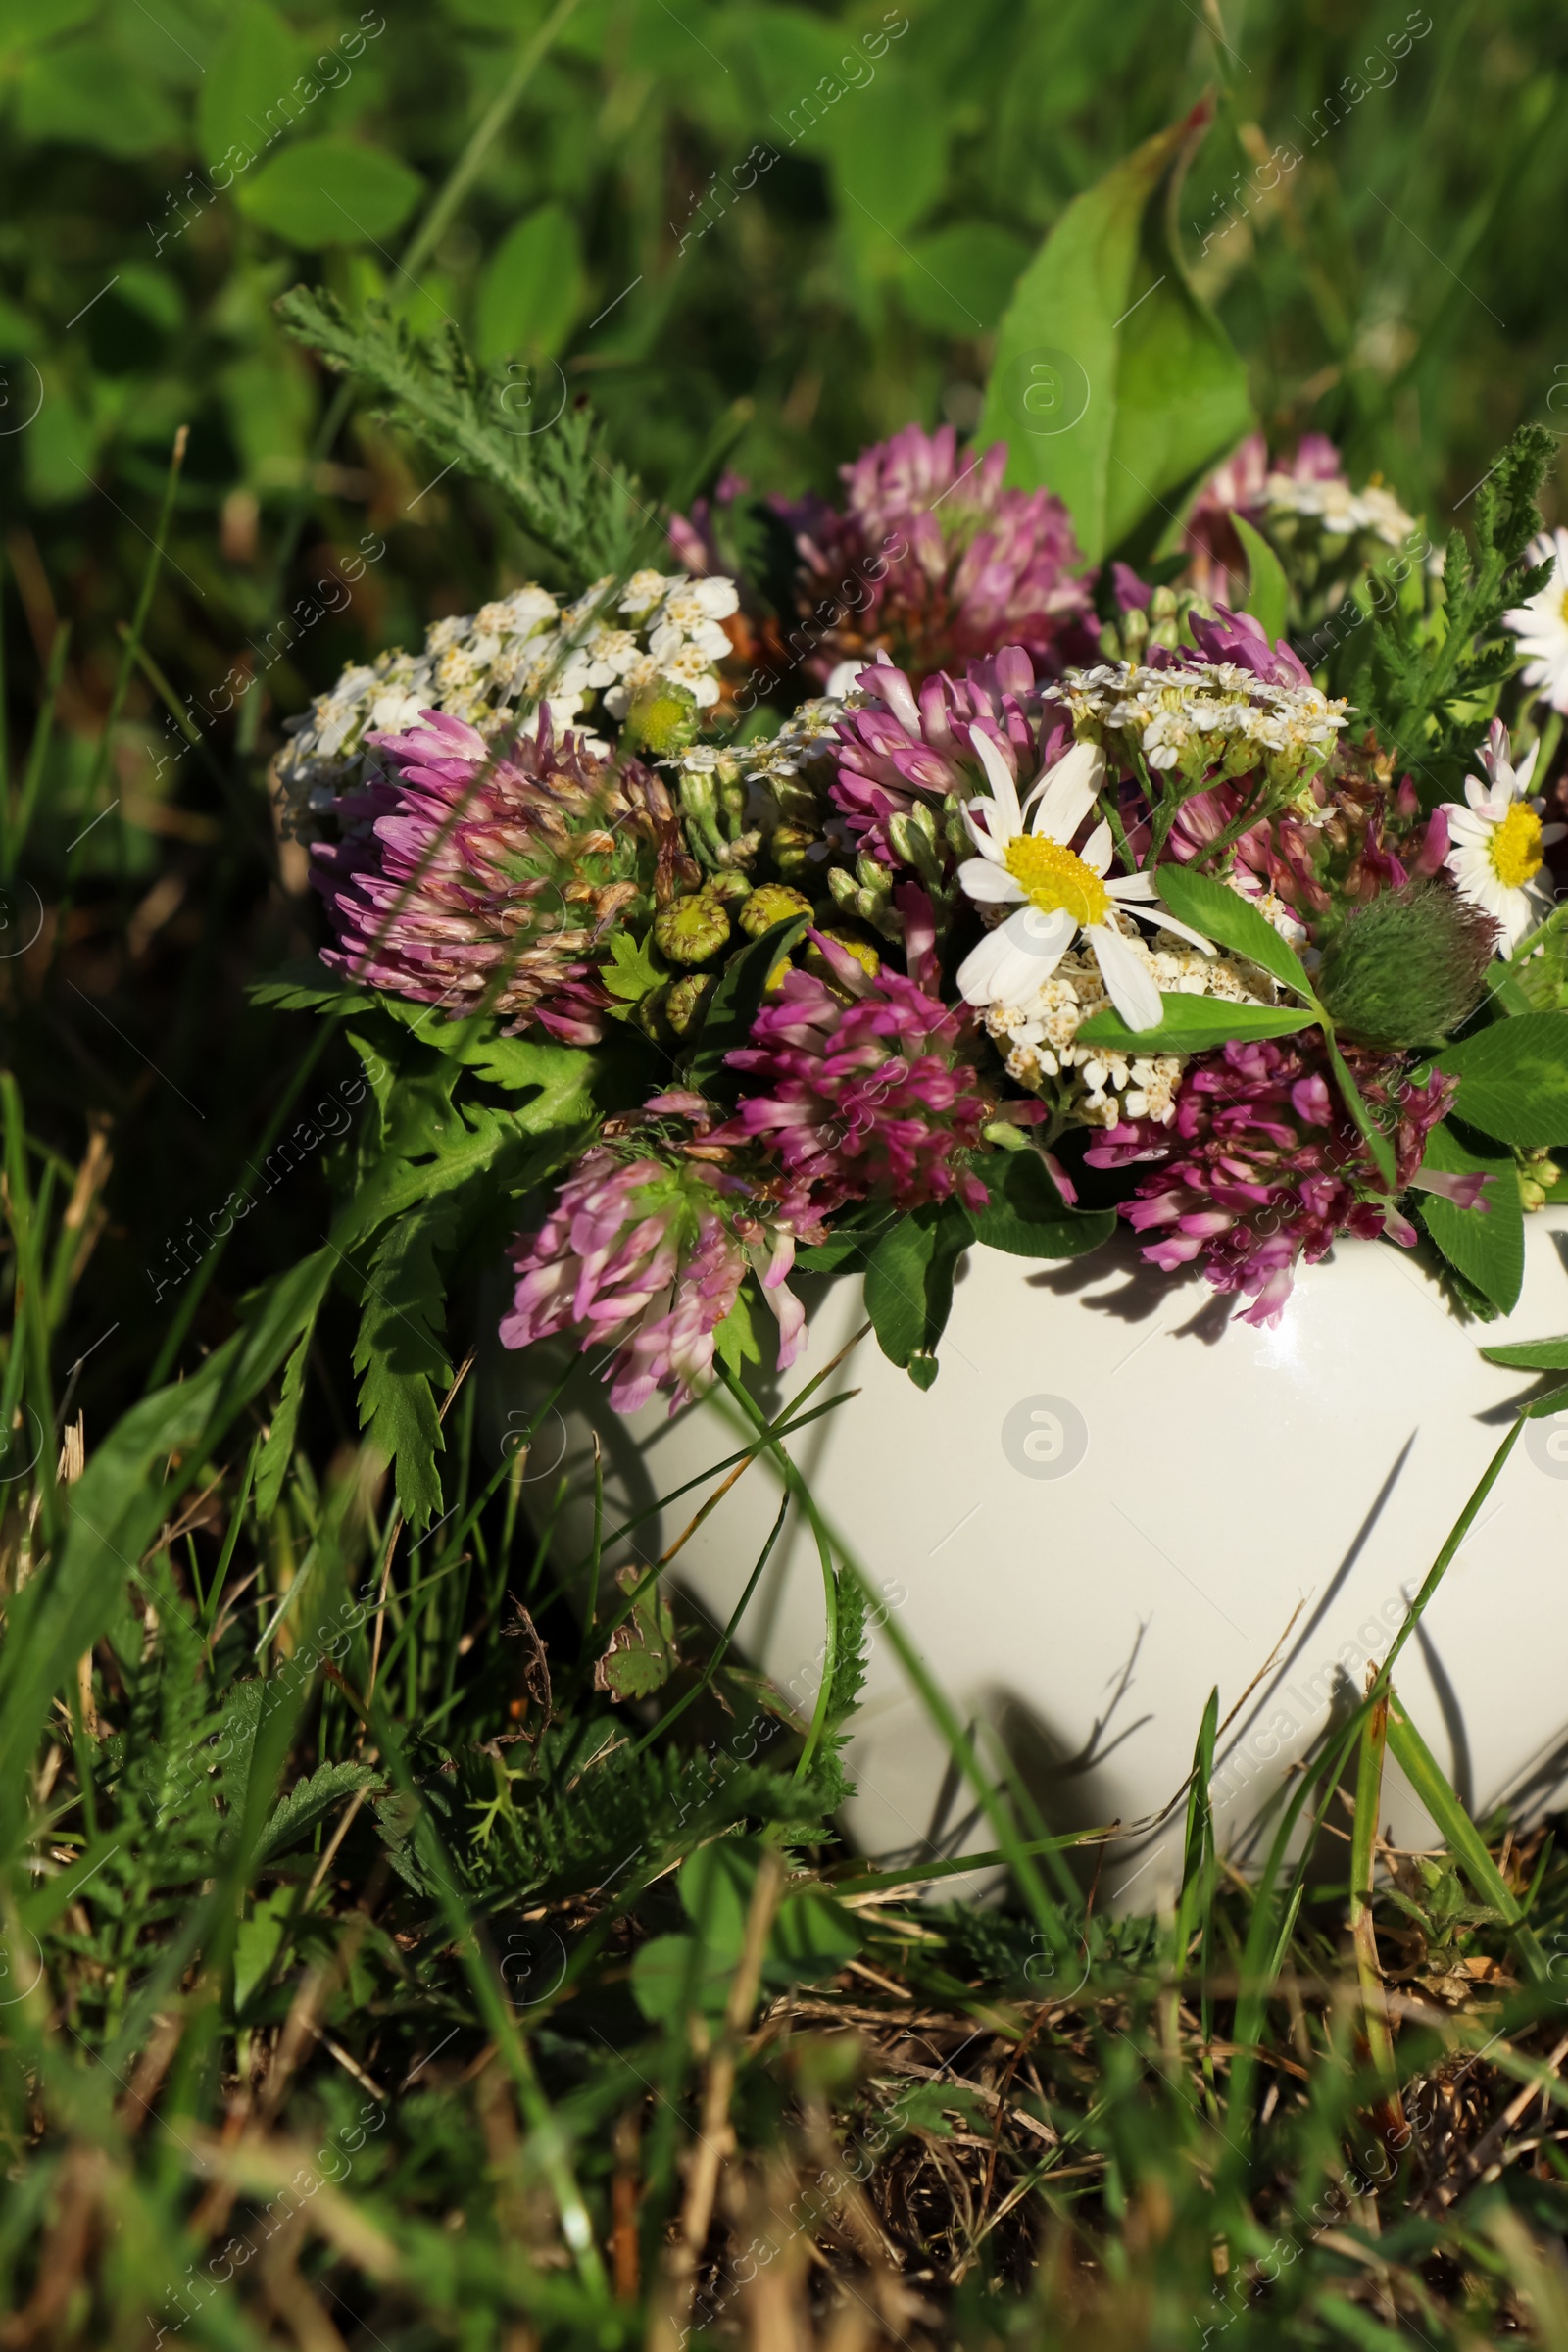 Photo of Ceramic mortar with different wildflowers and herbs on green grass outdoors, closeup